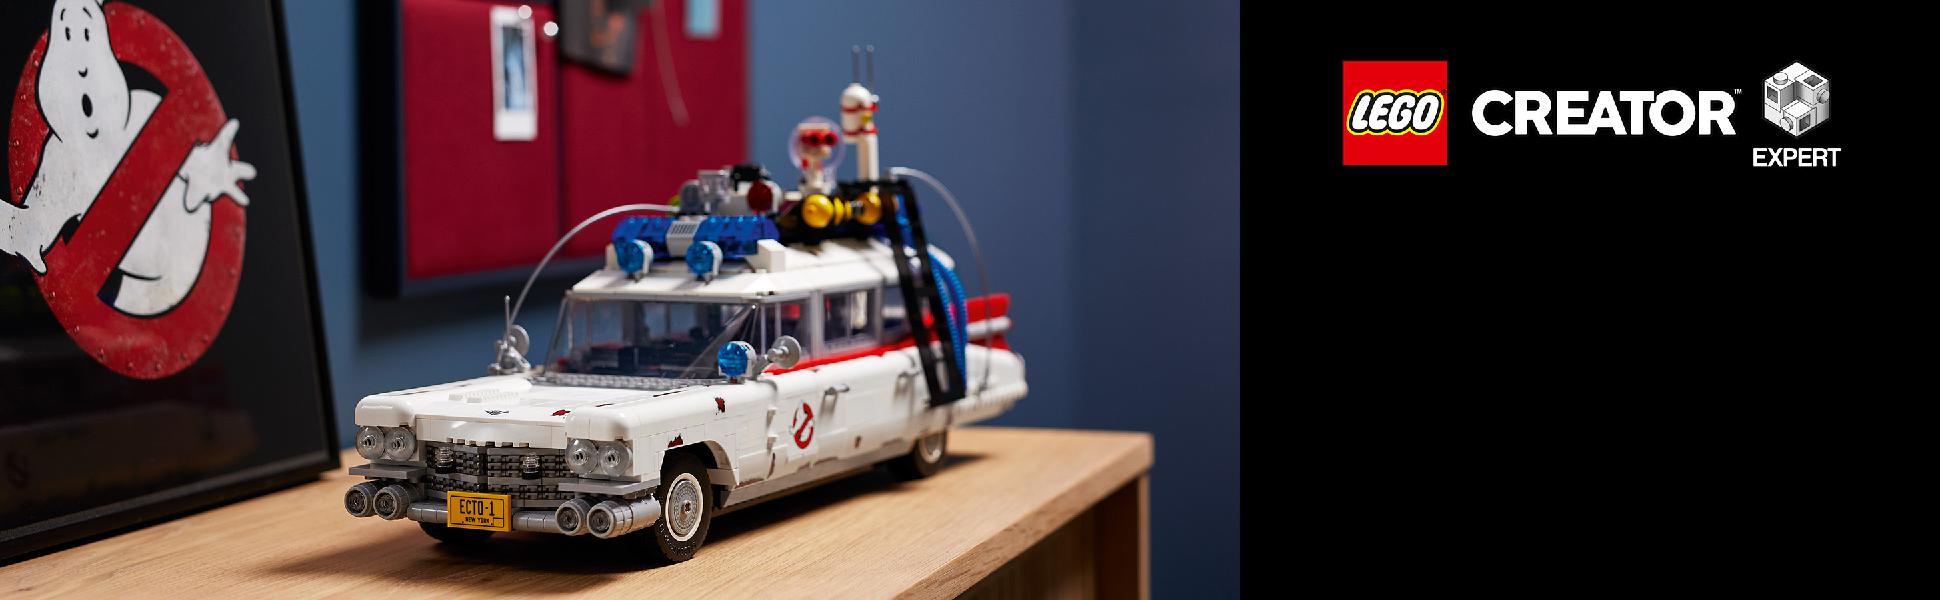 Ghostbusters™ ECTO-1 10274